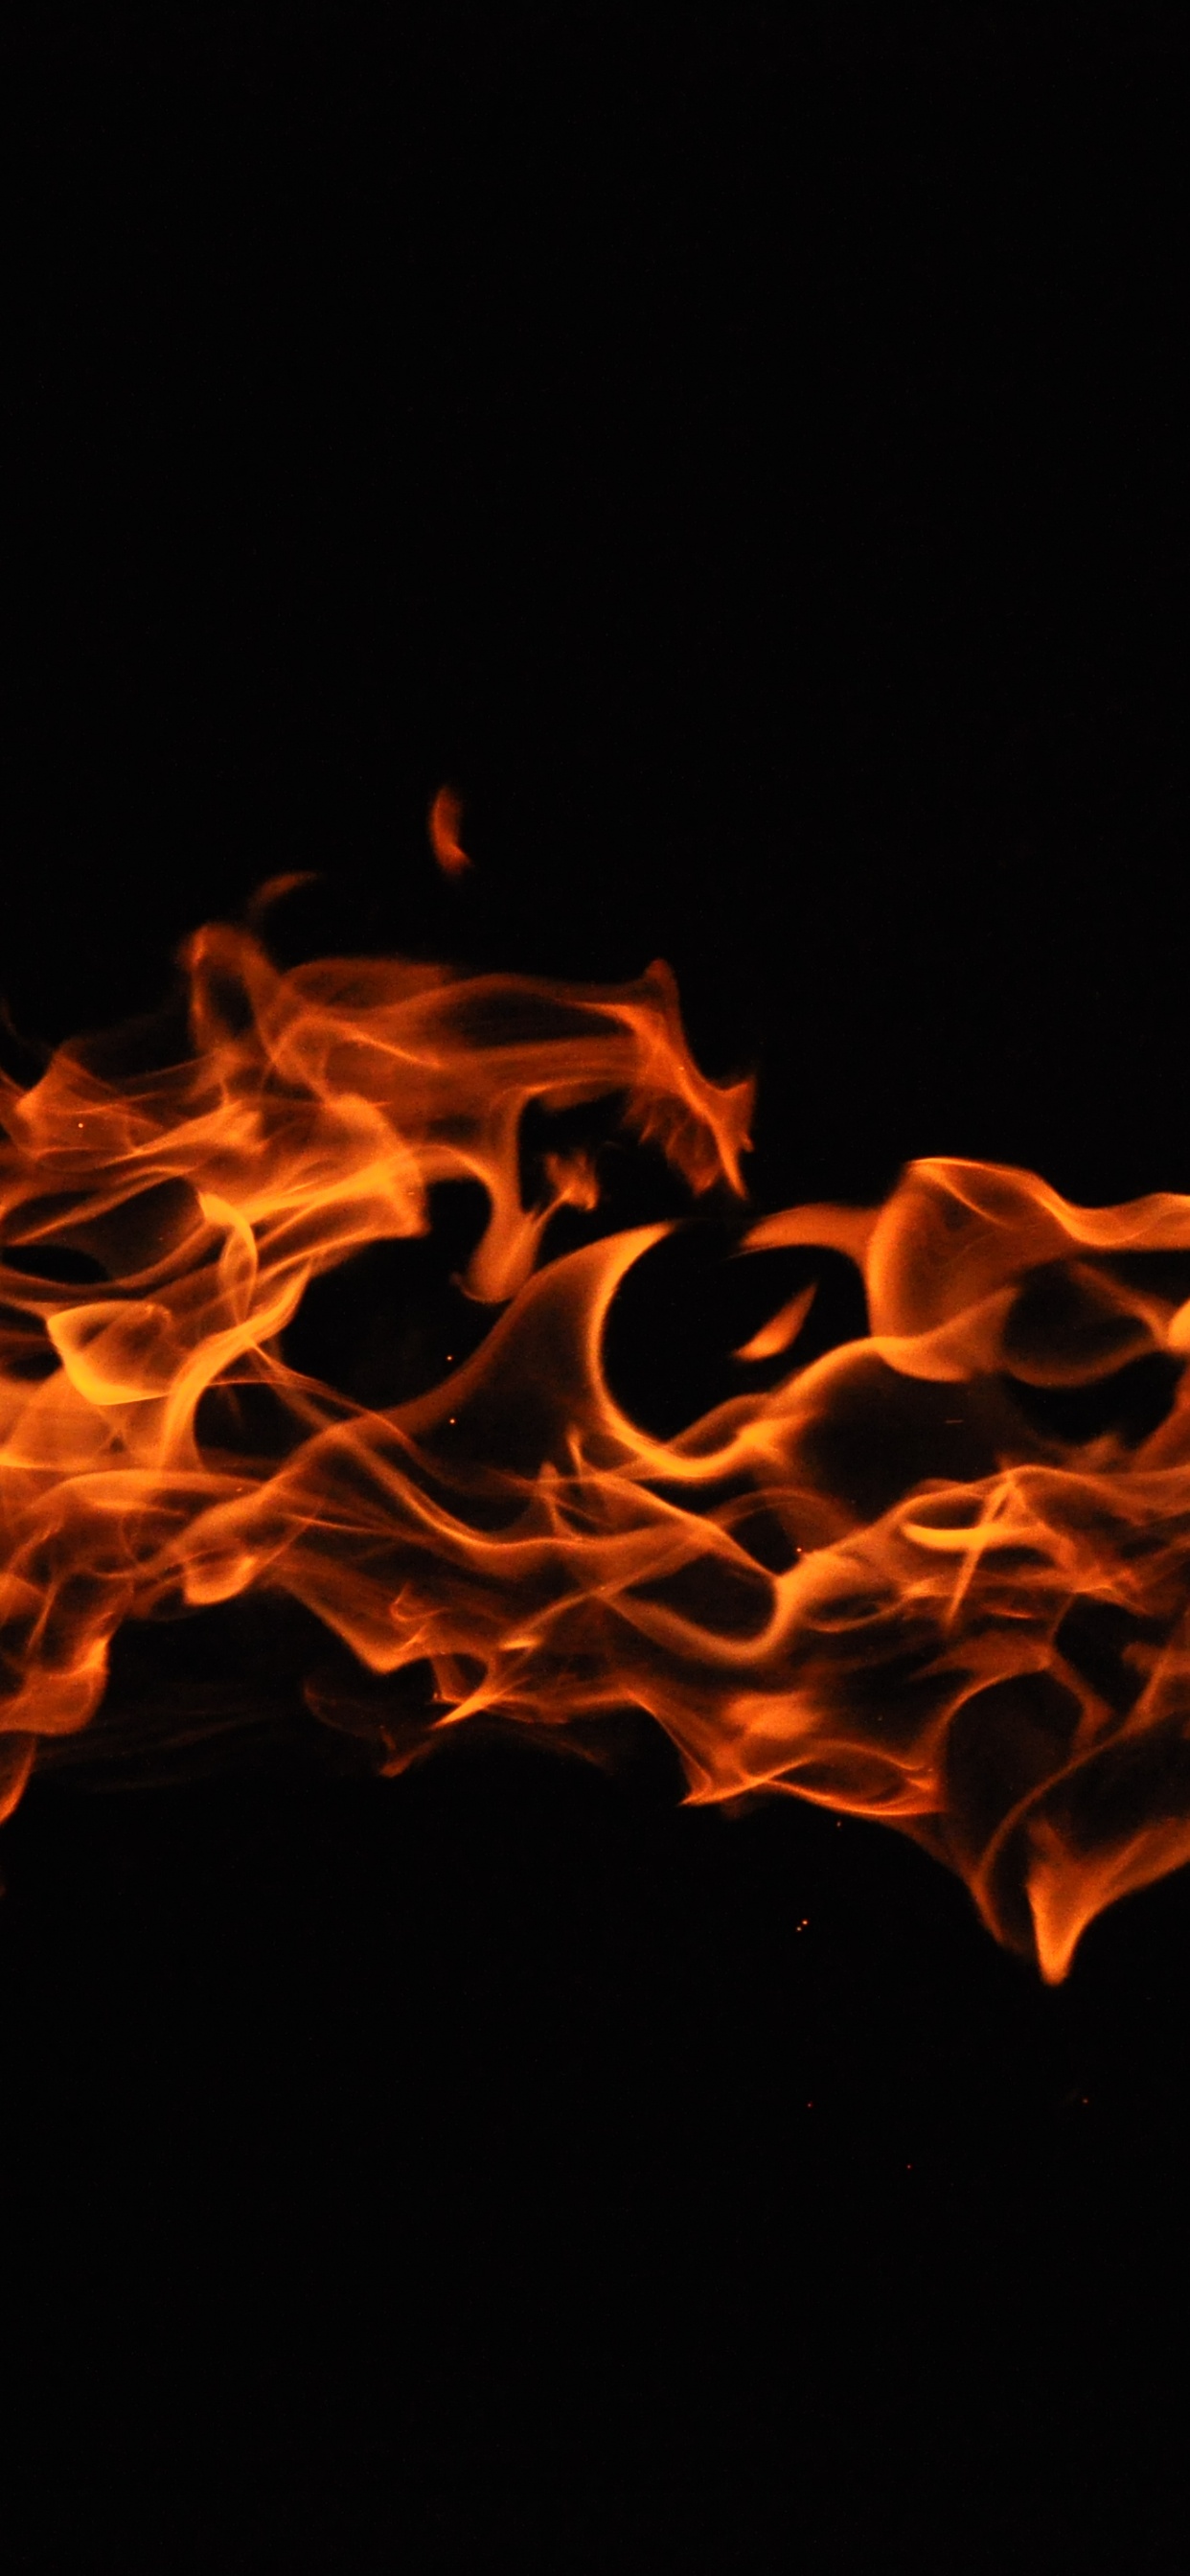 Fire in Black Background With Black Background. Wallpaper in 1242x2688 Resolution